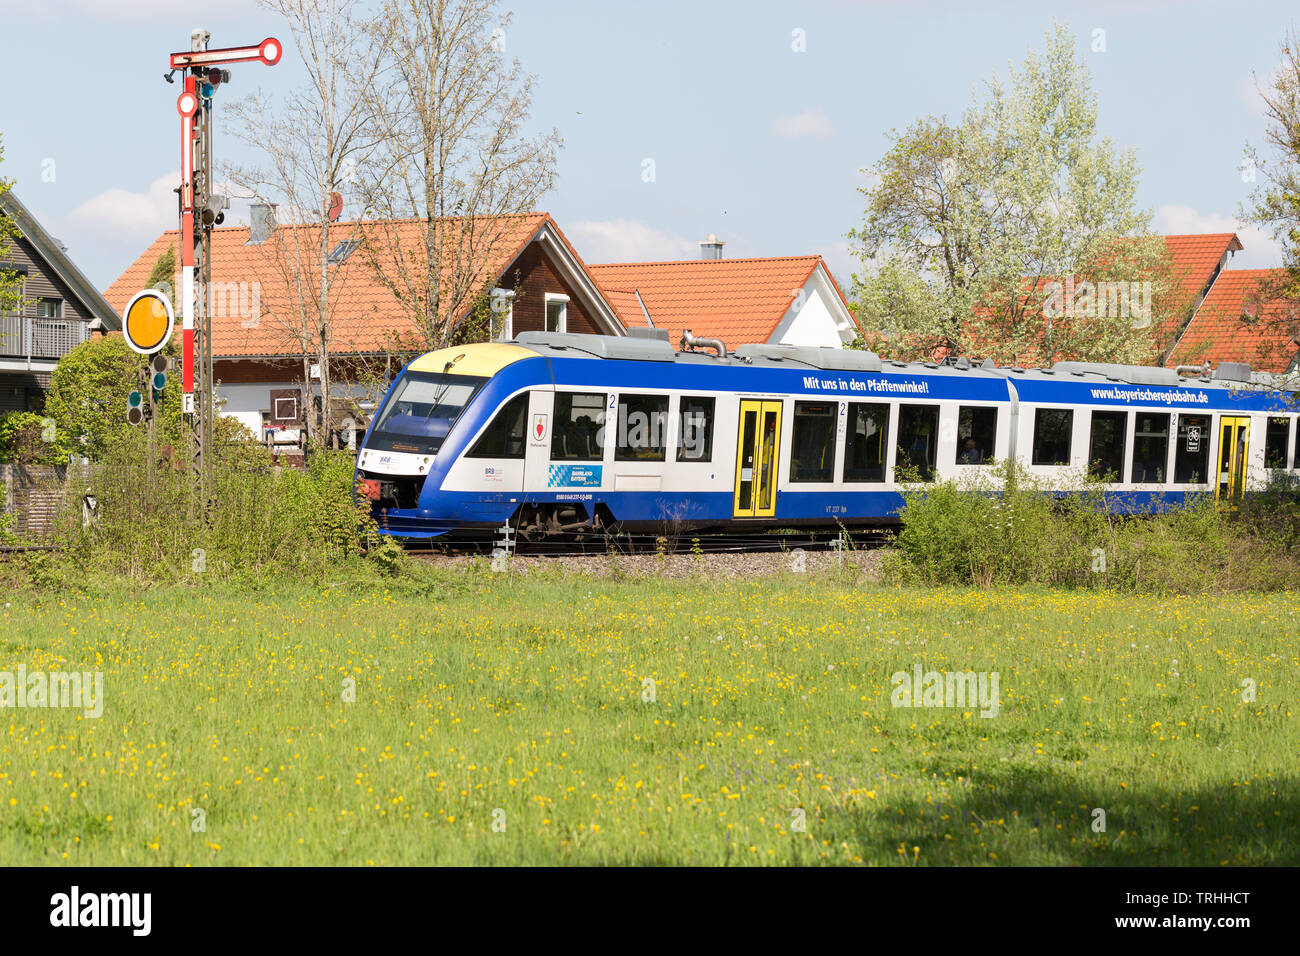 Blue & white colored train of Bayerische Regionbahn (BRB) near Utting. The train type is LINT 41, manufactured by Alstom. The engine is diesel driven. Stock Photo